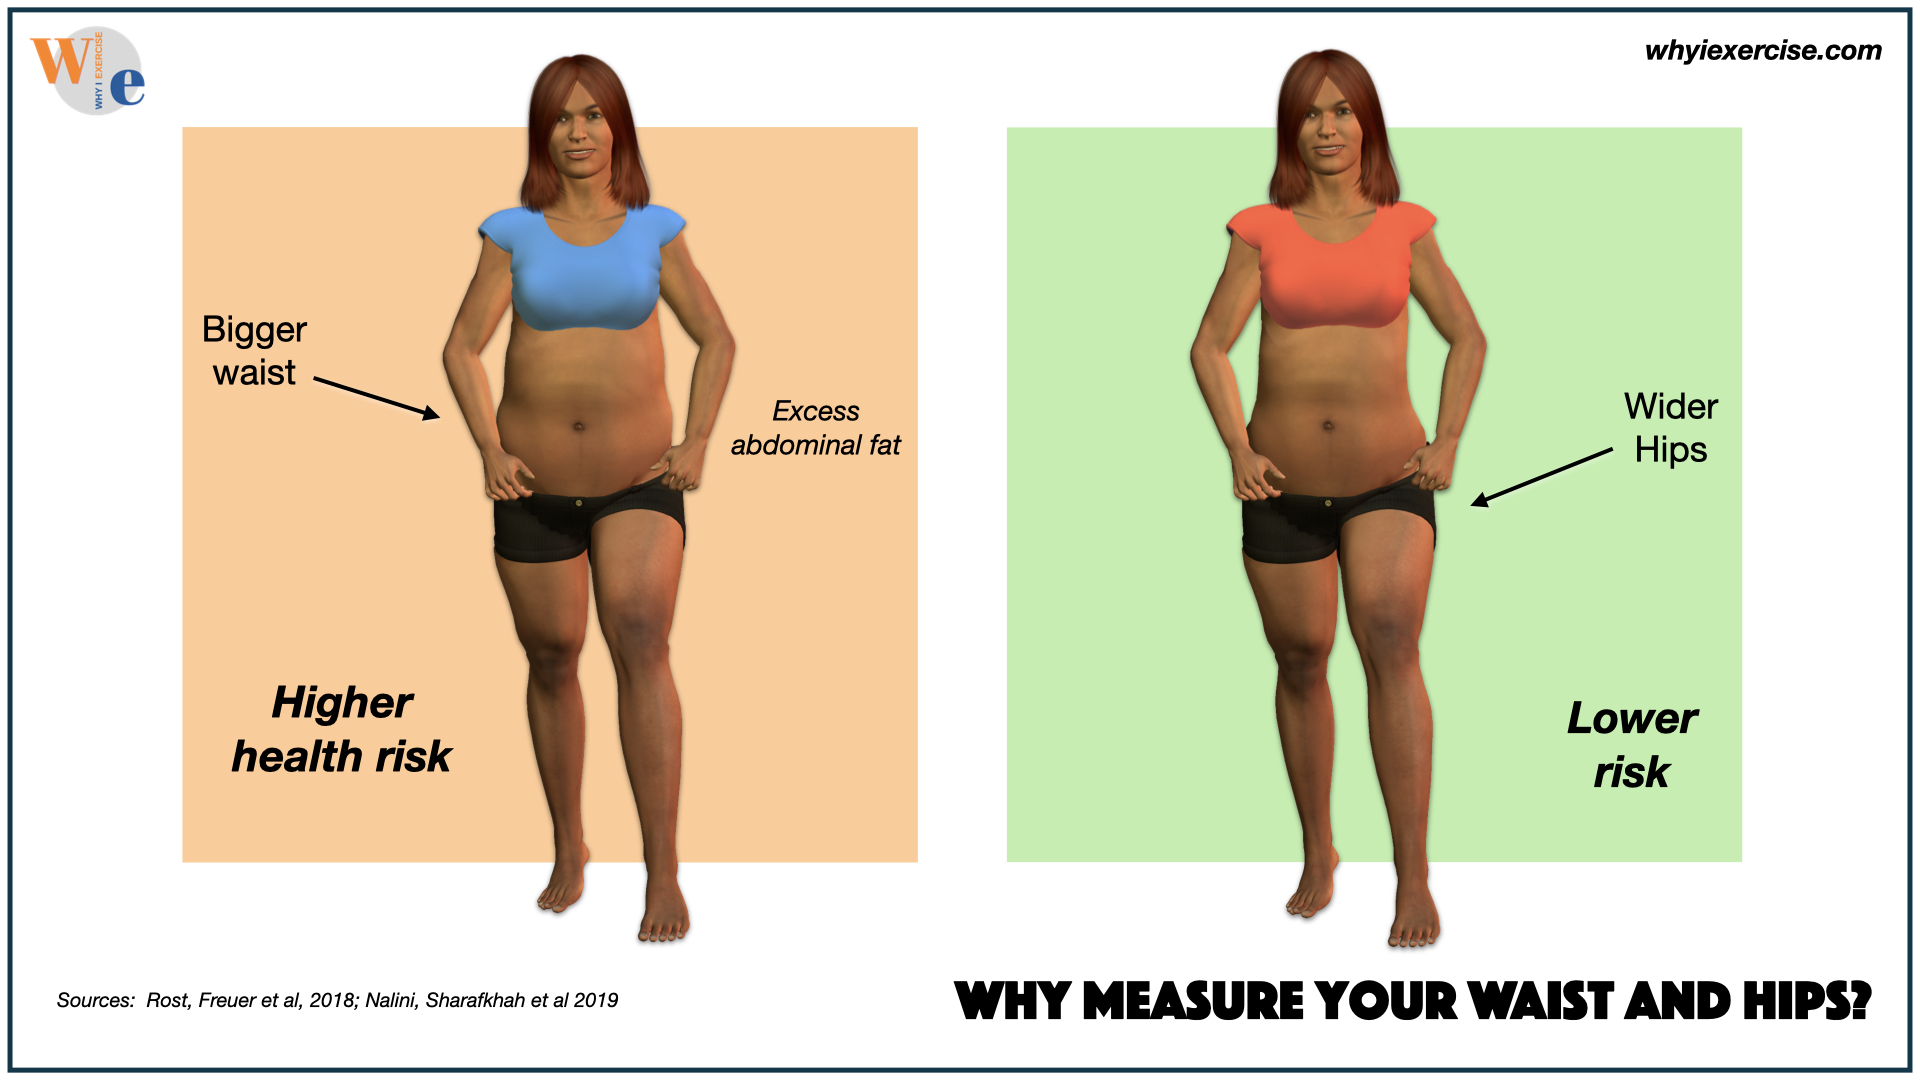 Why measure your waist and hips?